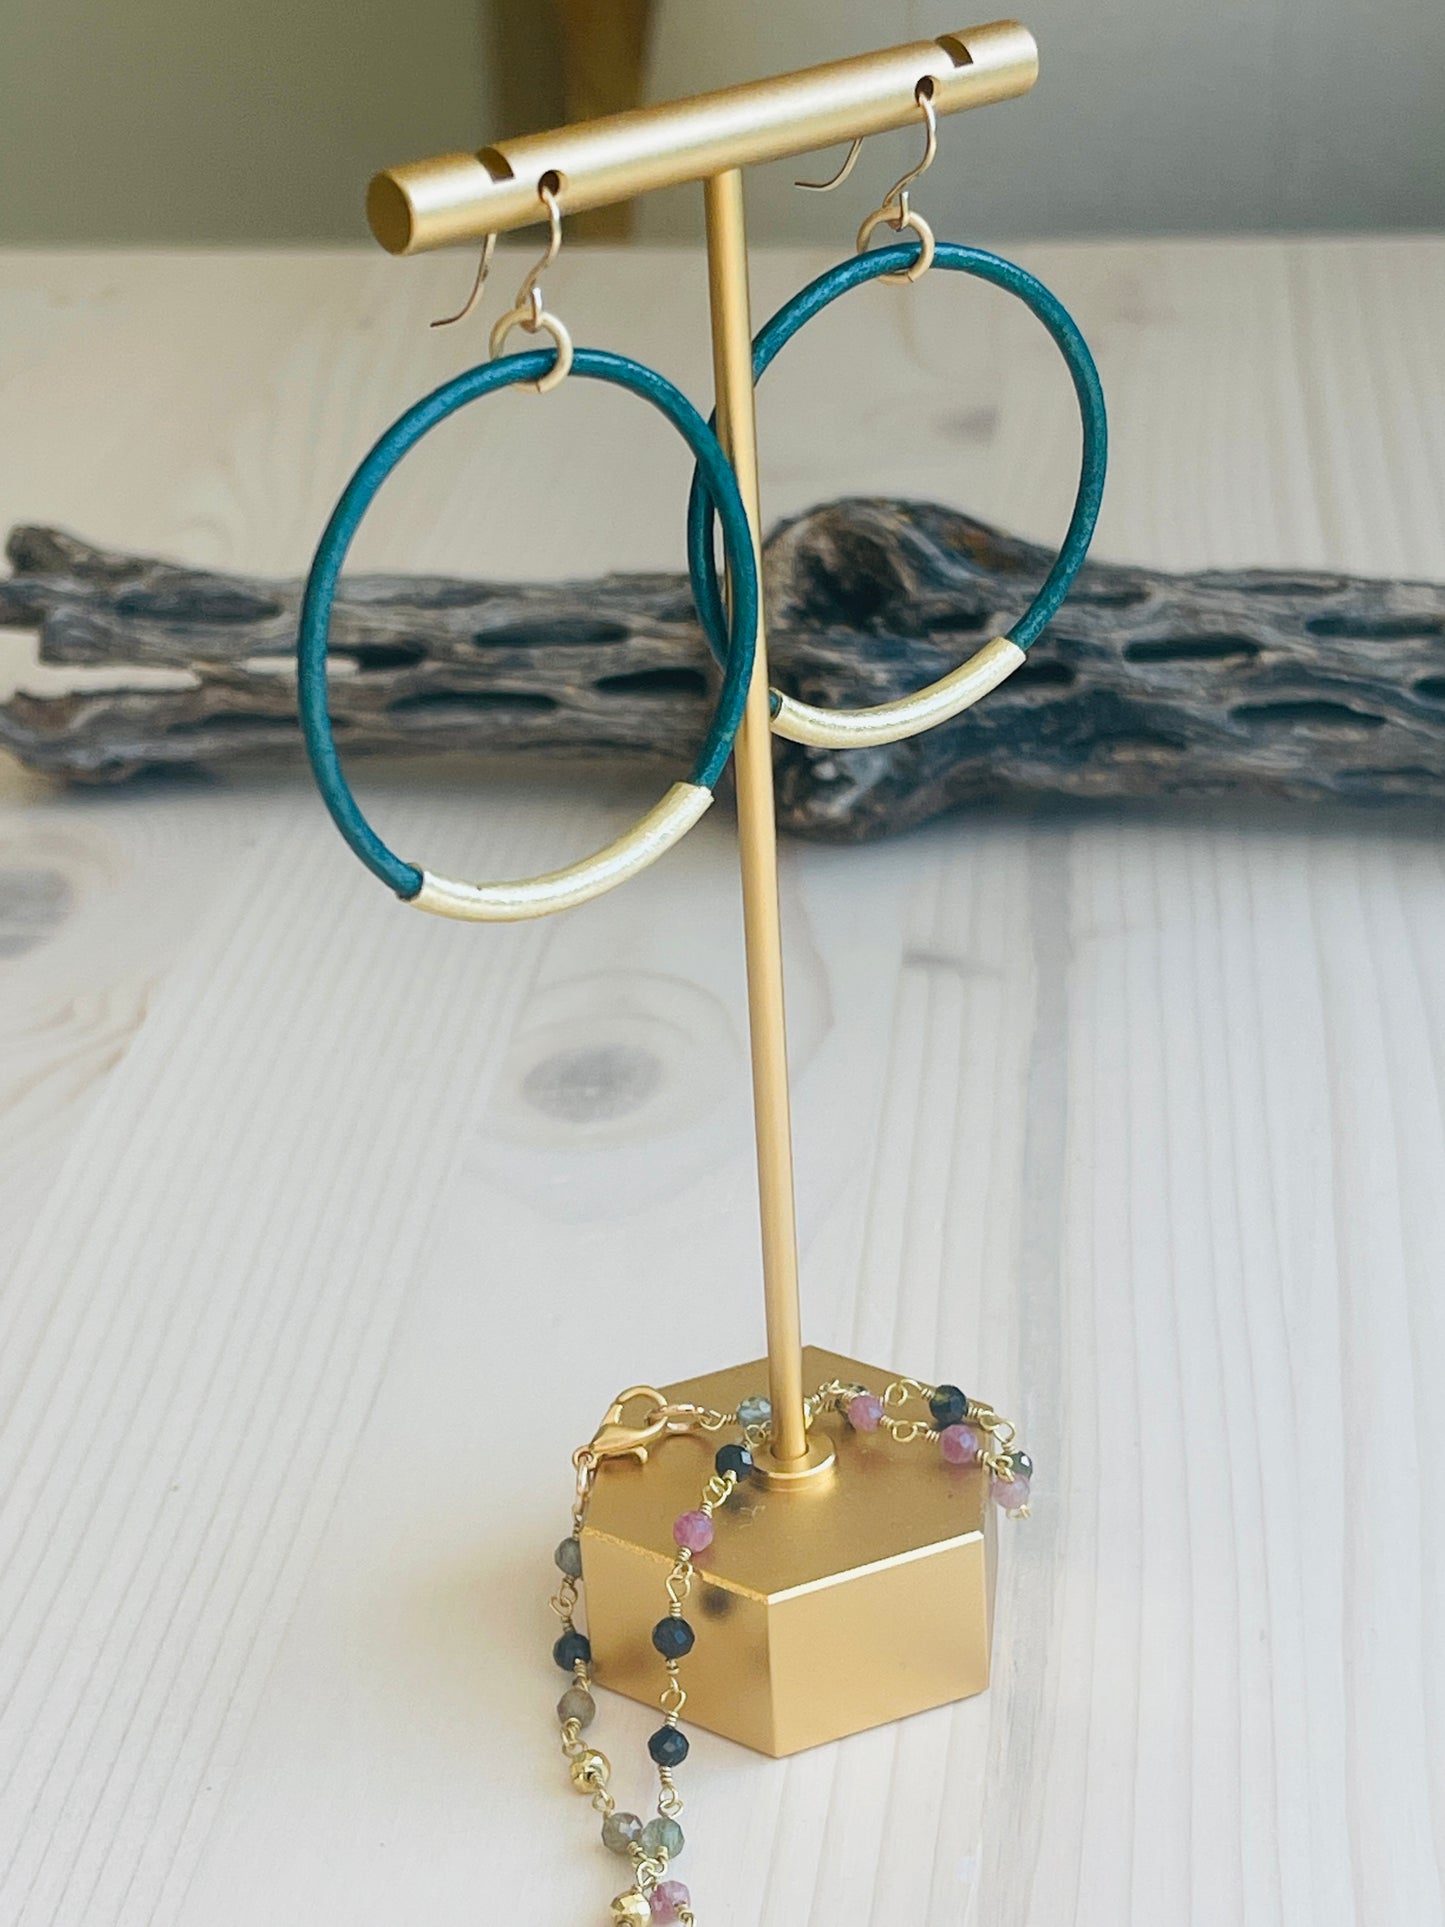 Teal Leather Hoops displayed on t-shaped stand with dirftwood in background